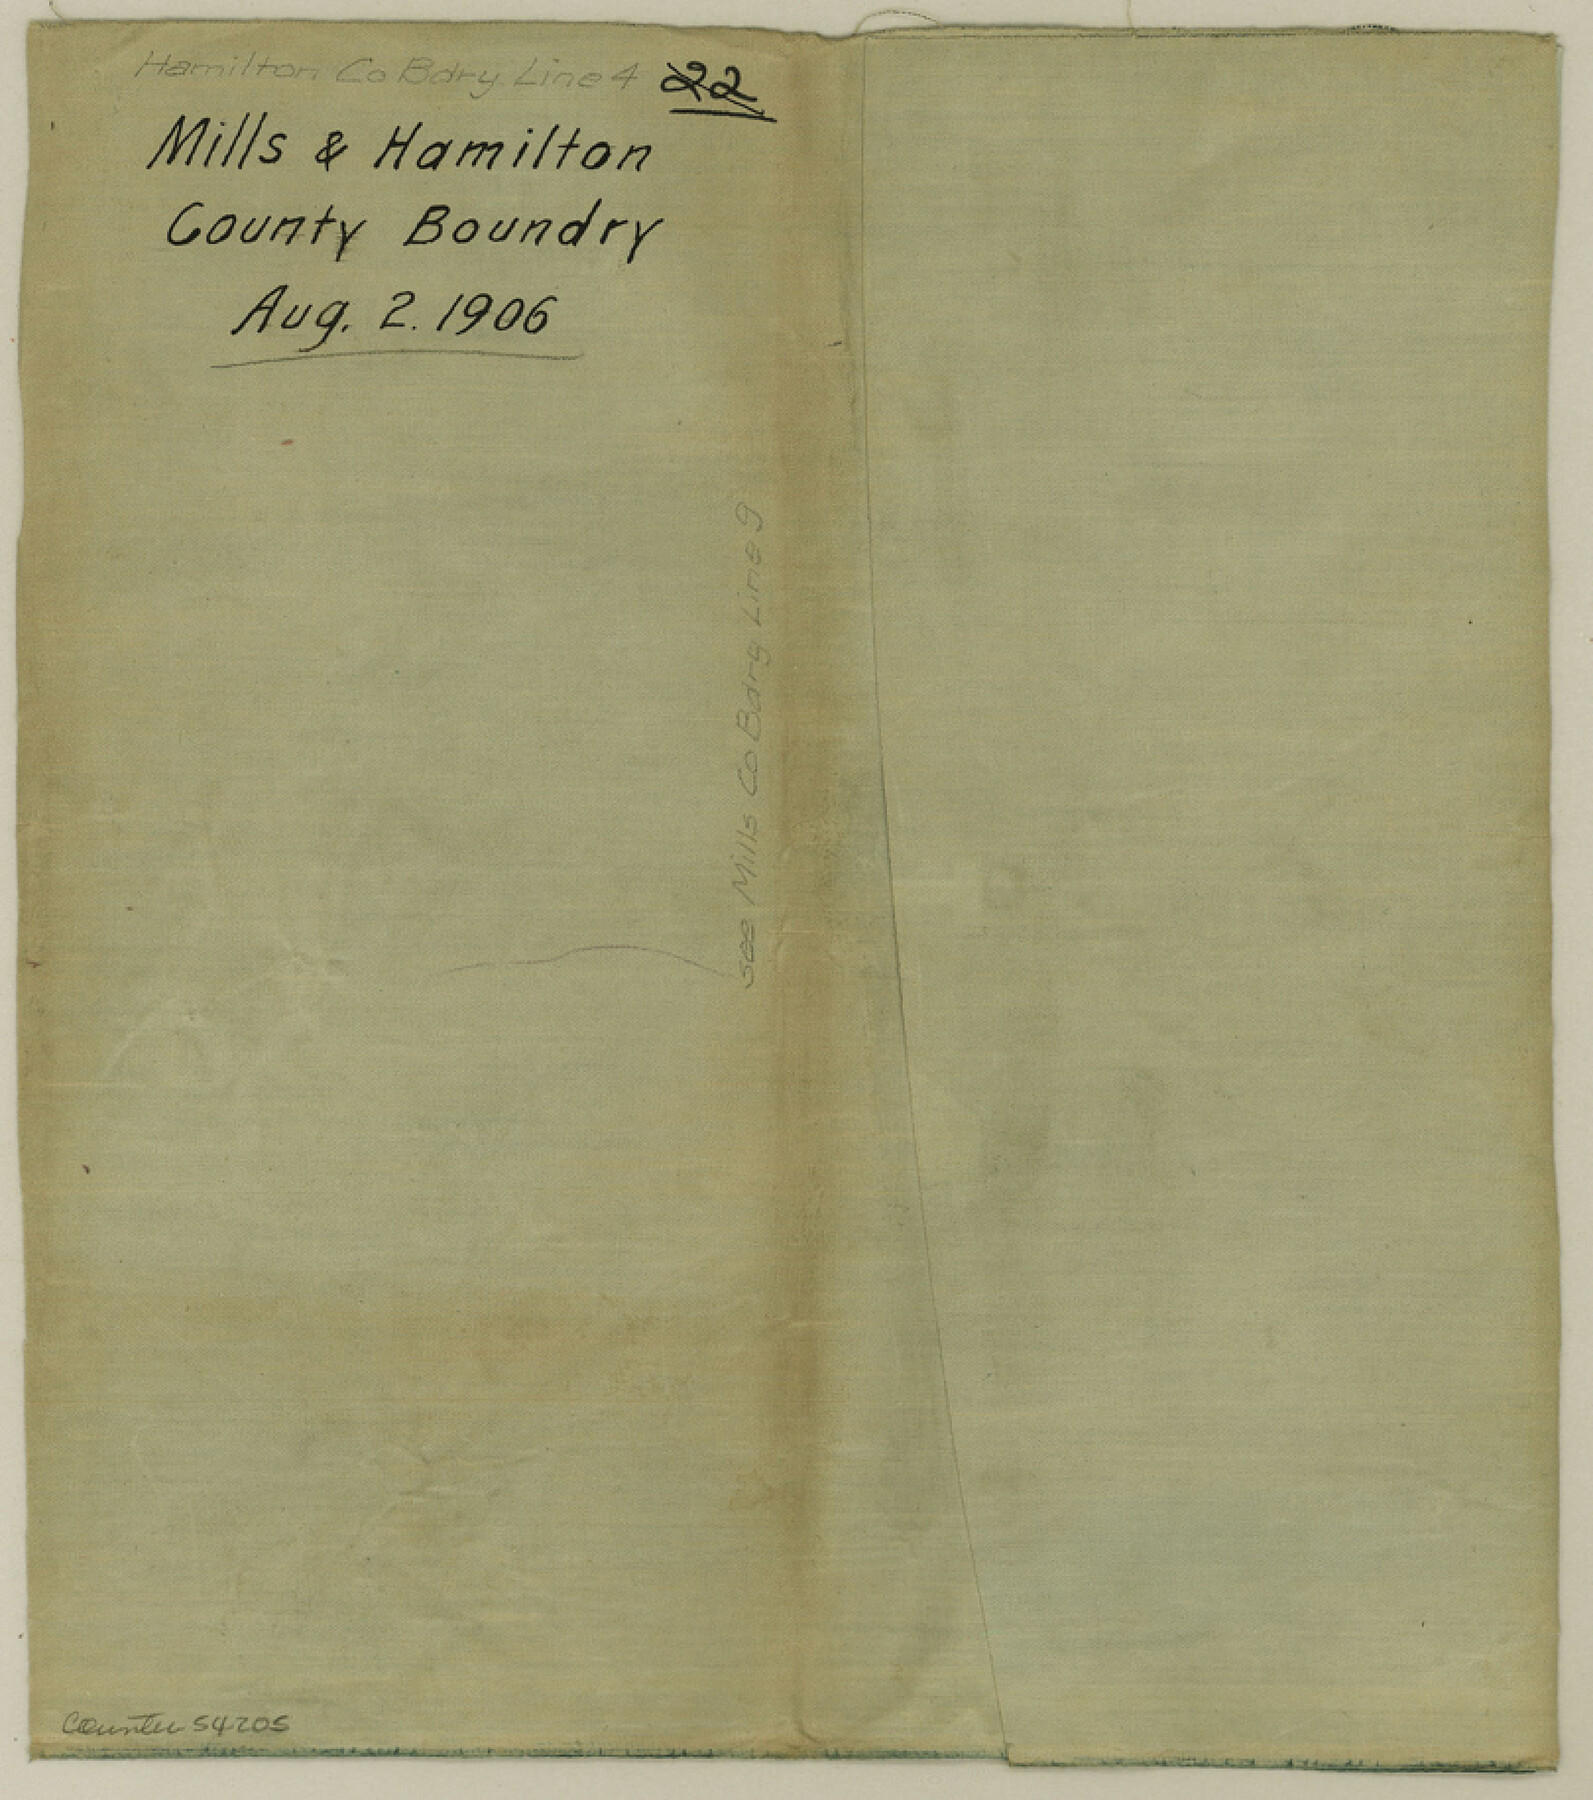 54205, Hamilton County Boundary File 4, General Map Collection